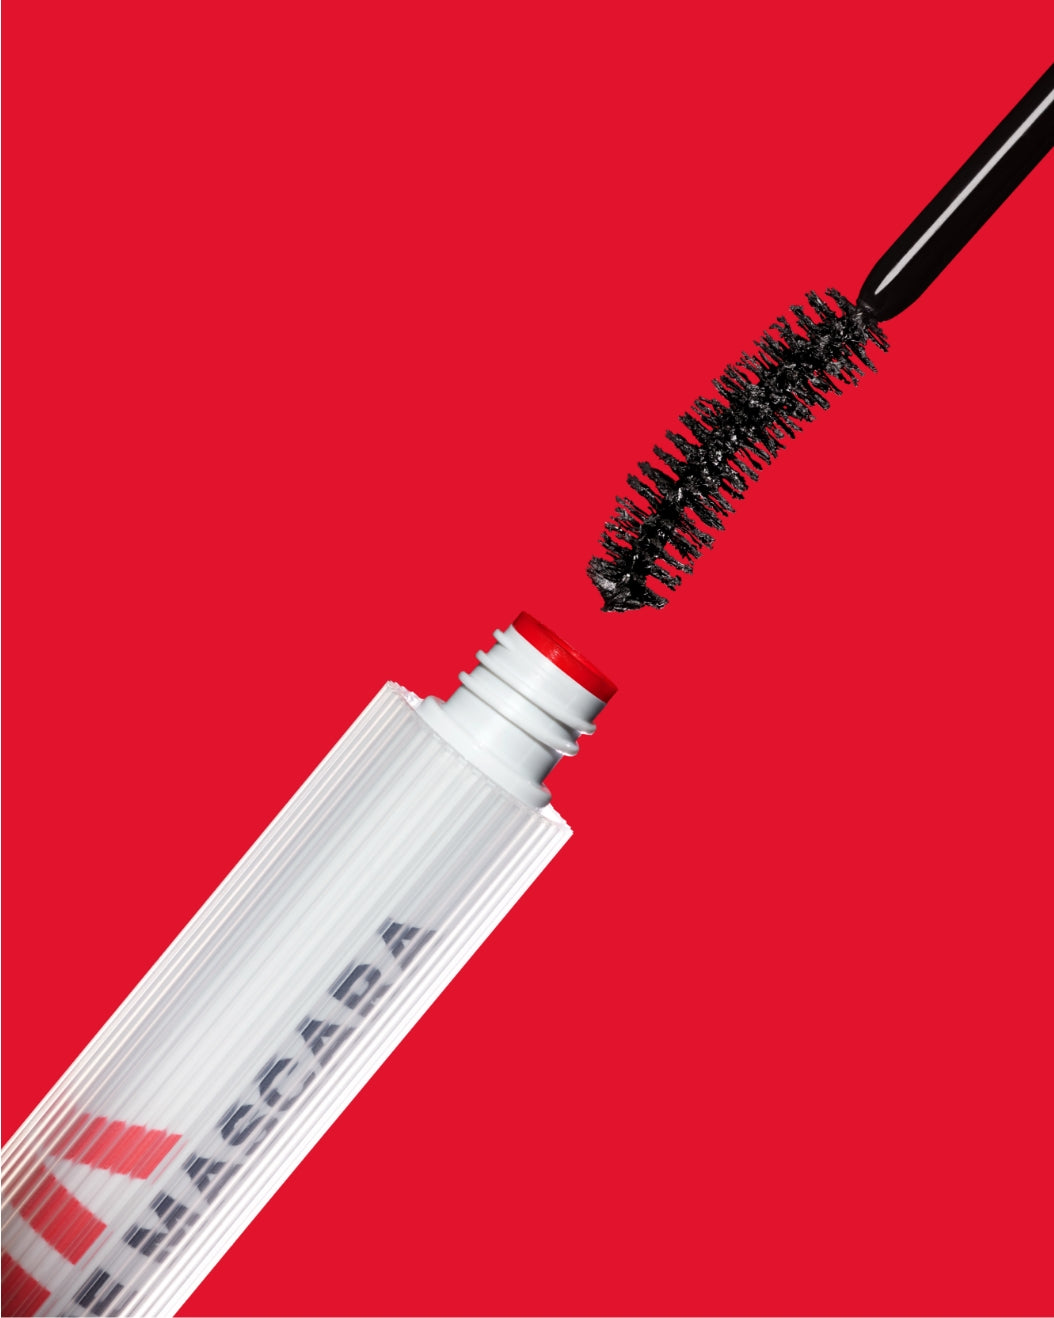 Lash Lift Brush in Milk Makeup RISE Mascara helps lashes hold a curl